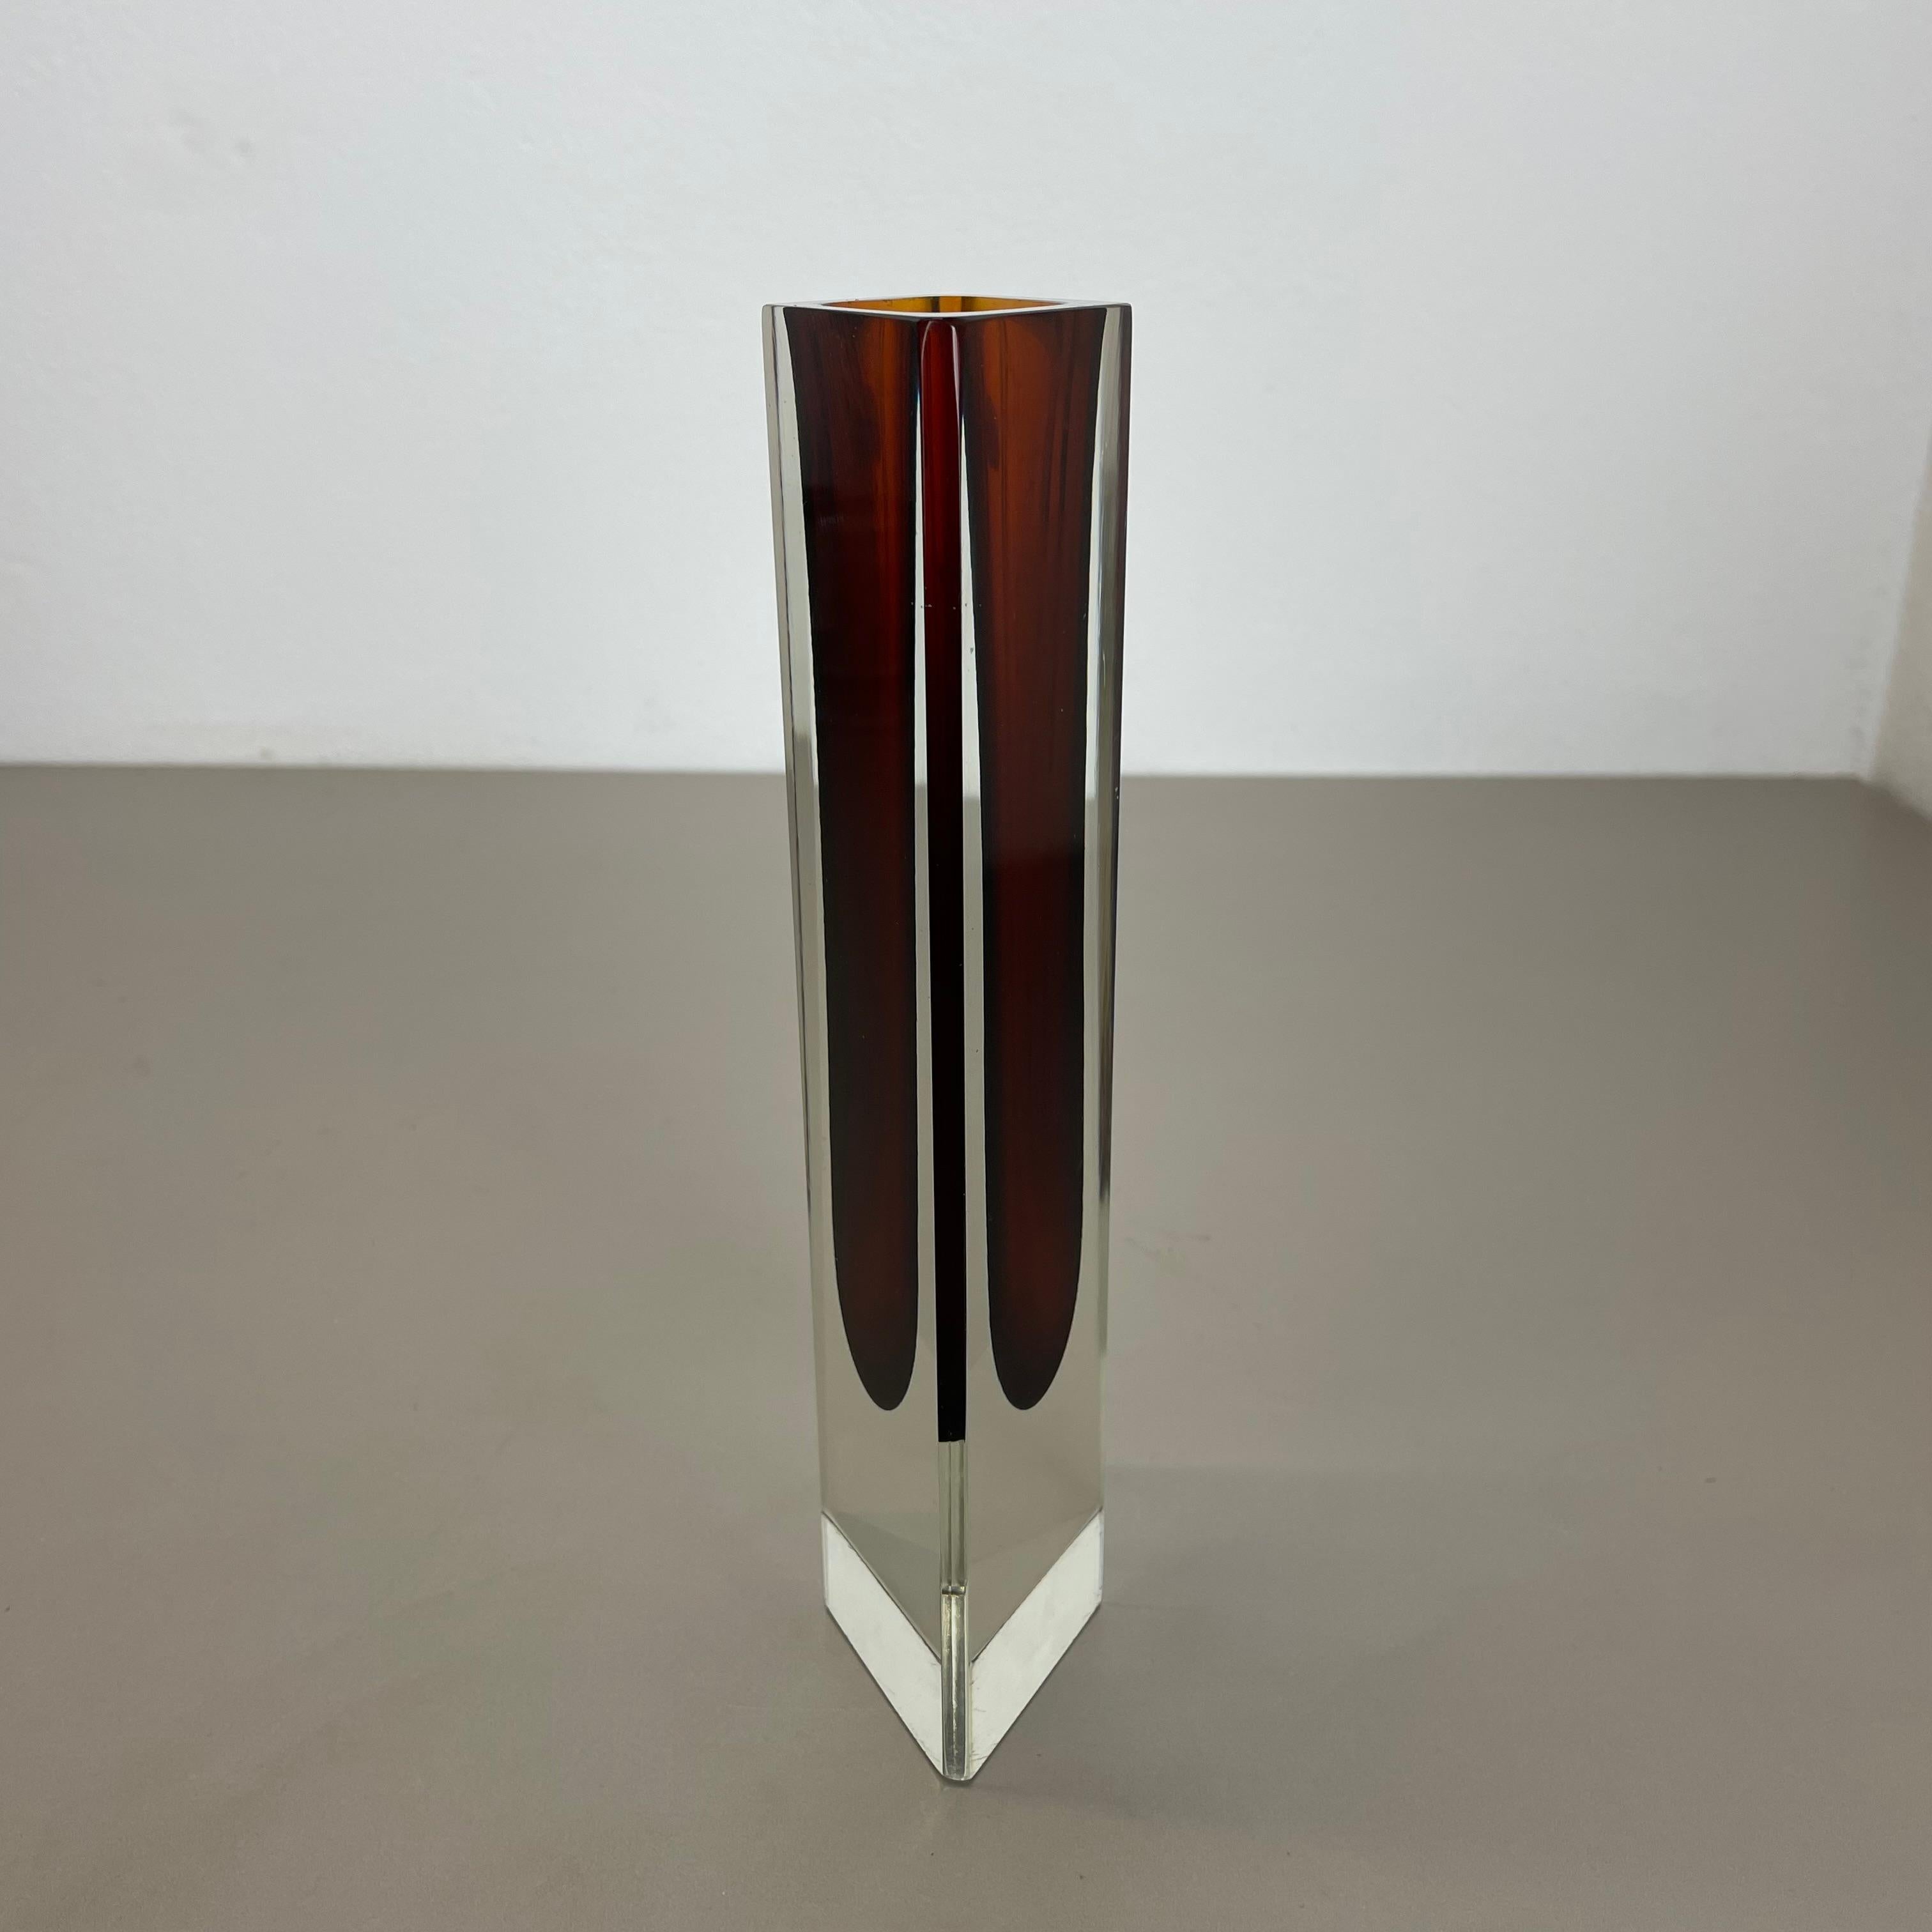 Large 25cm ochre Murano Glass Sommerso Vase, Flavio Poli Attributed, Italy 1970s For Sale 9